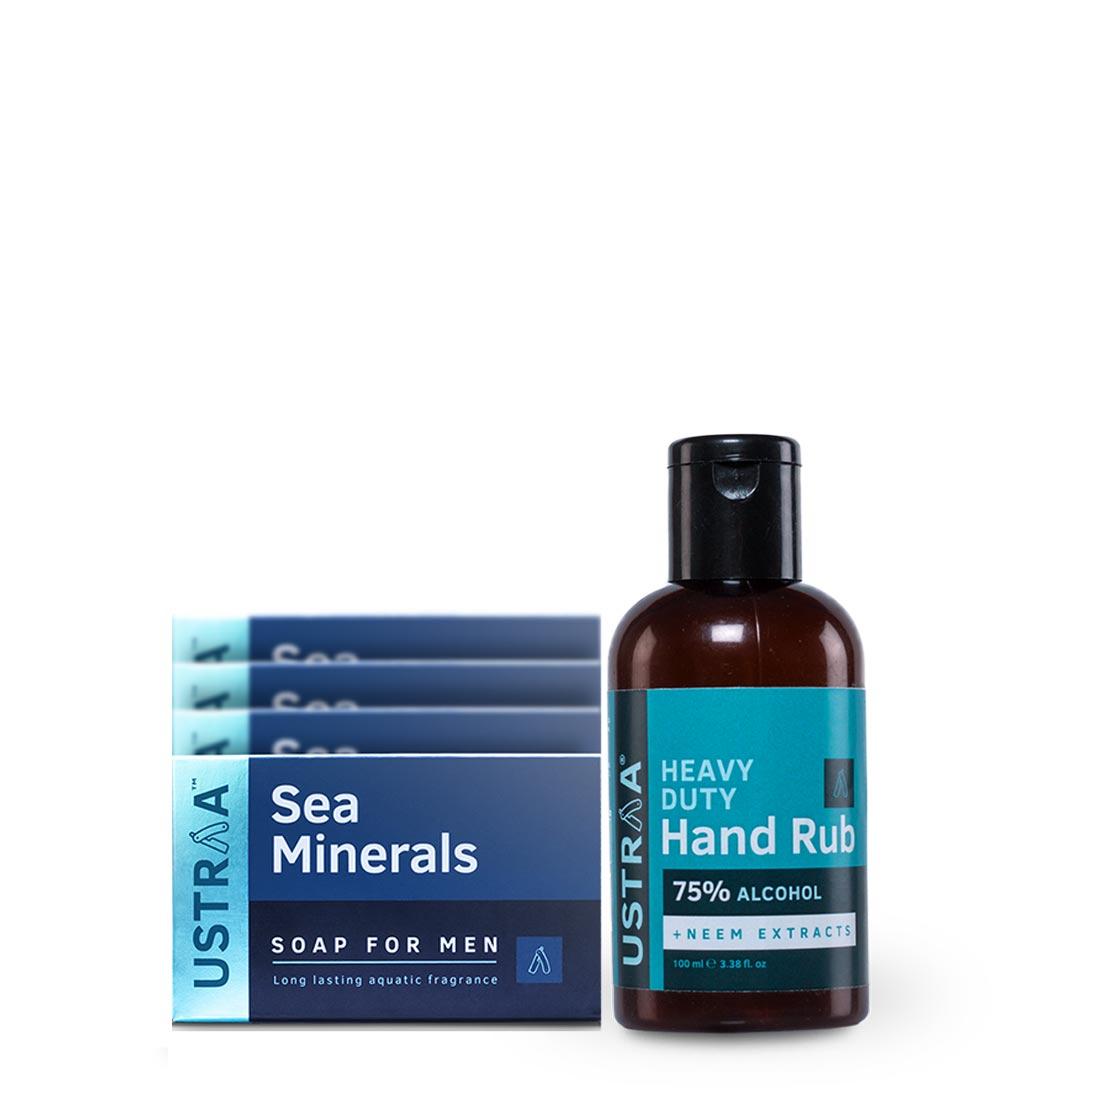 Deo Soap - Sea Minerals - Pack of 4 & Hand Rub